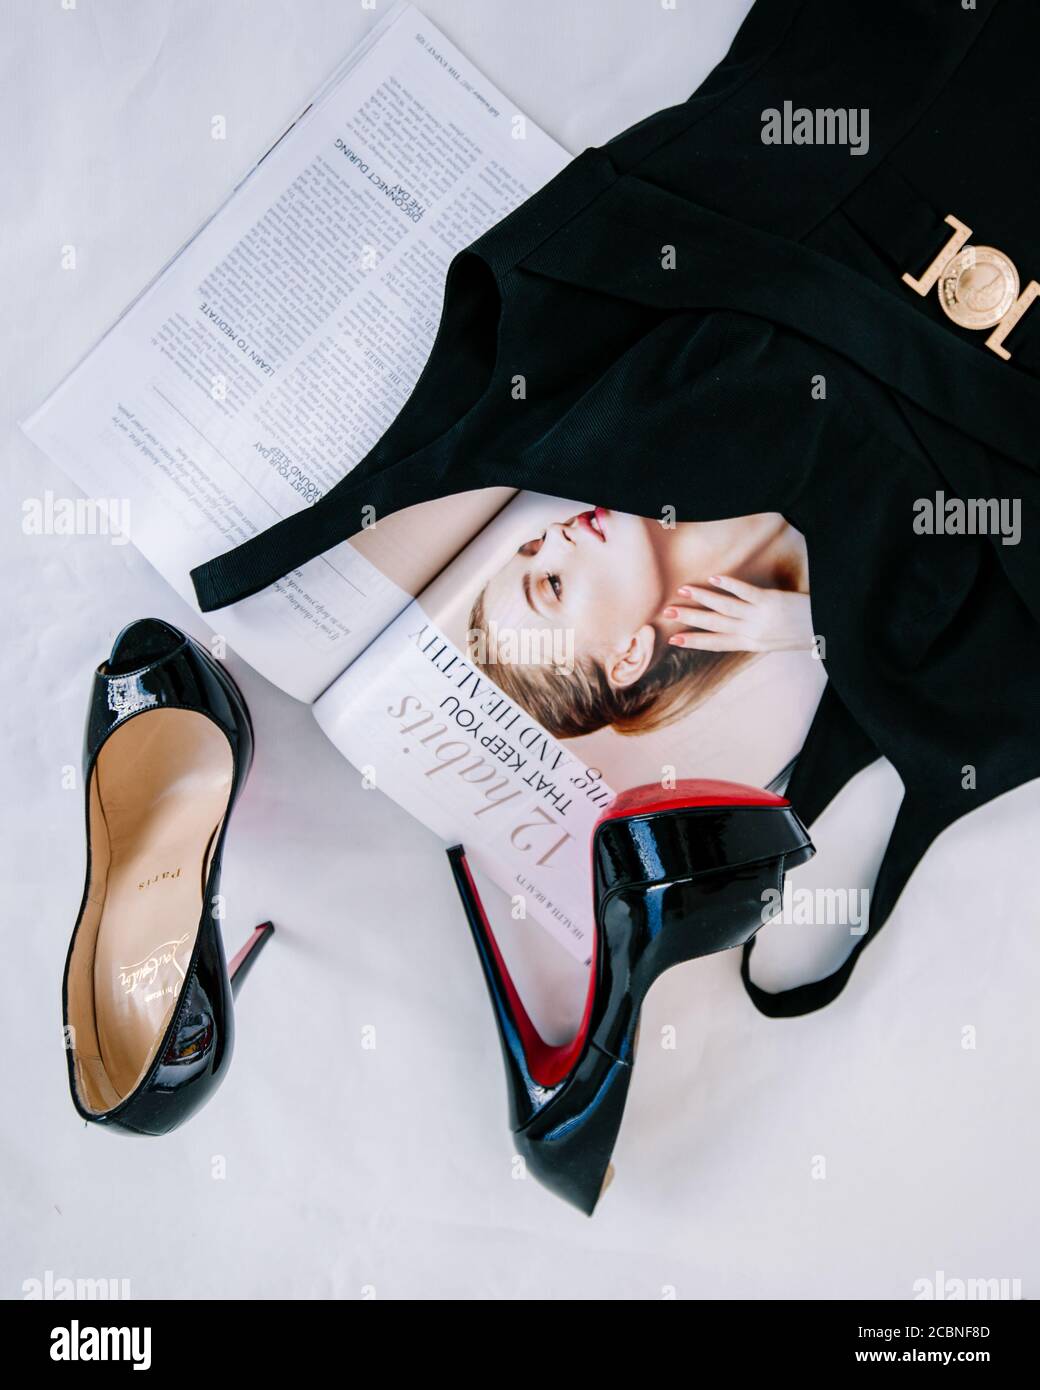 Fashion accessories for marketing with high heels and magazine with a  dress Stock Photo